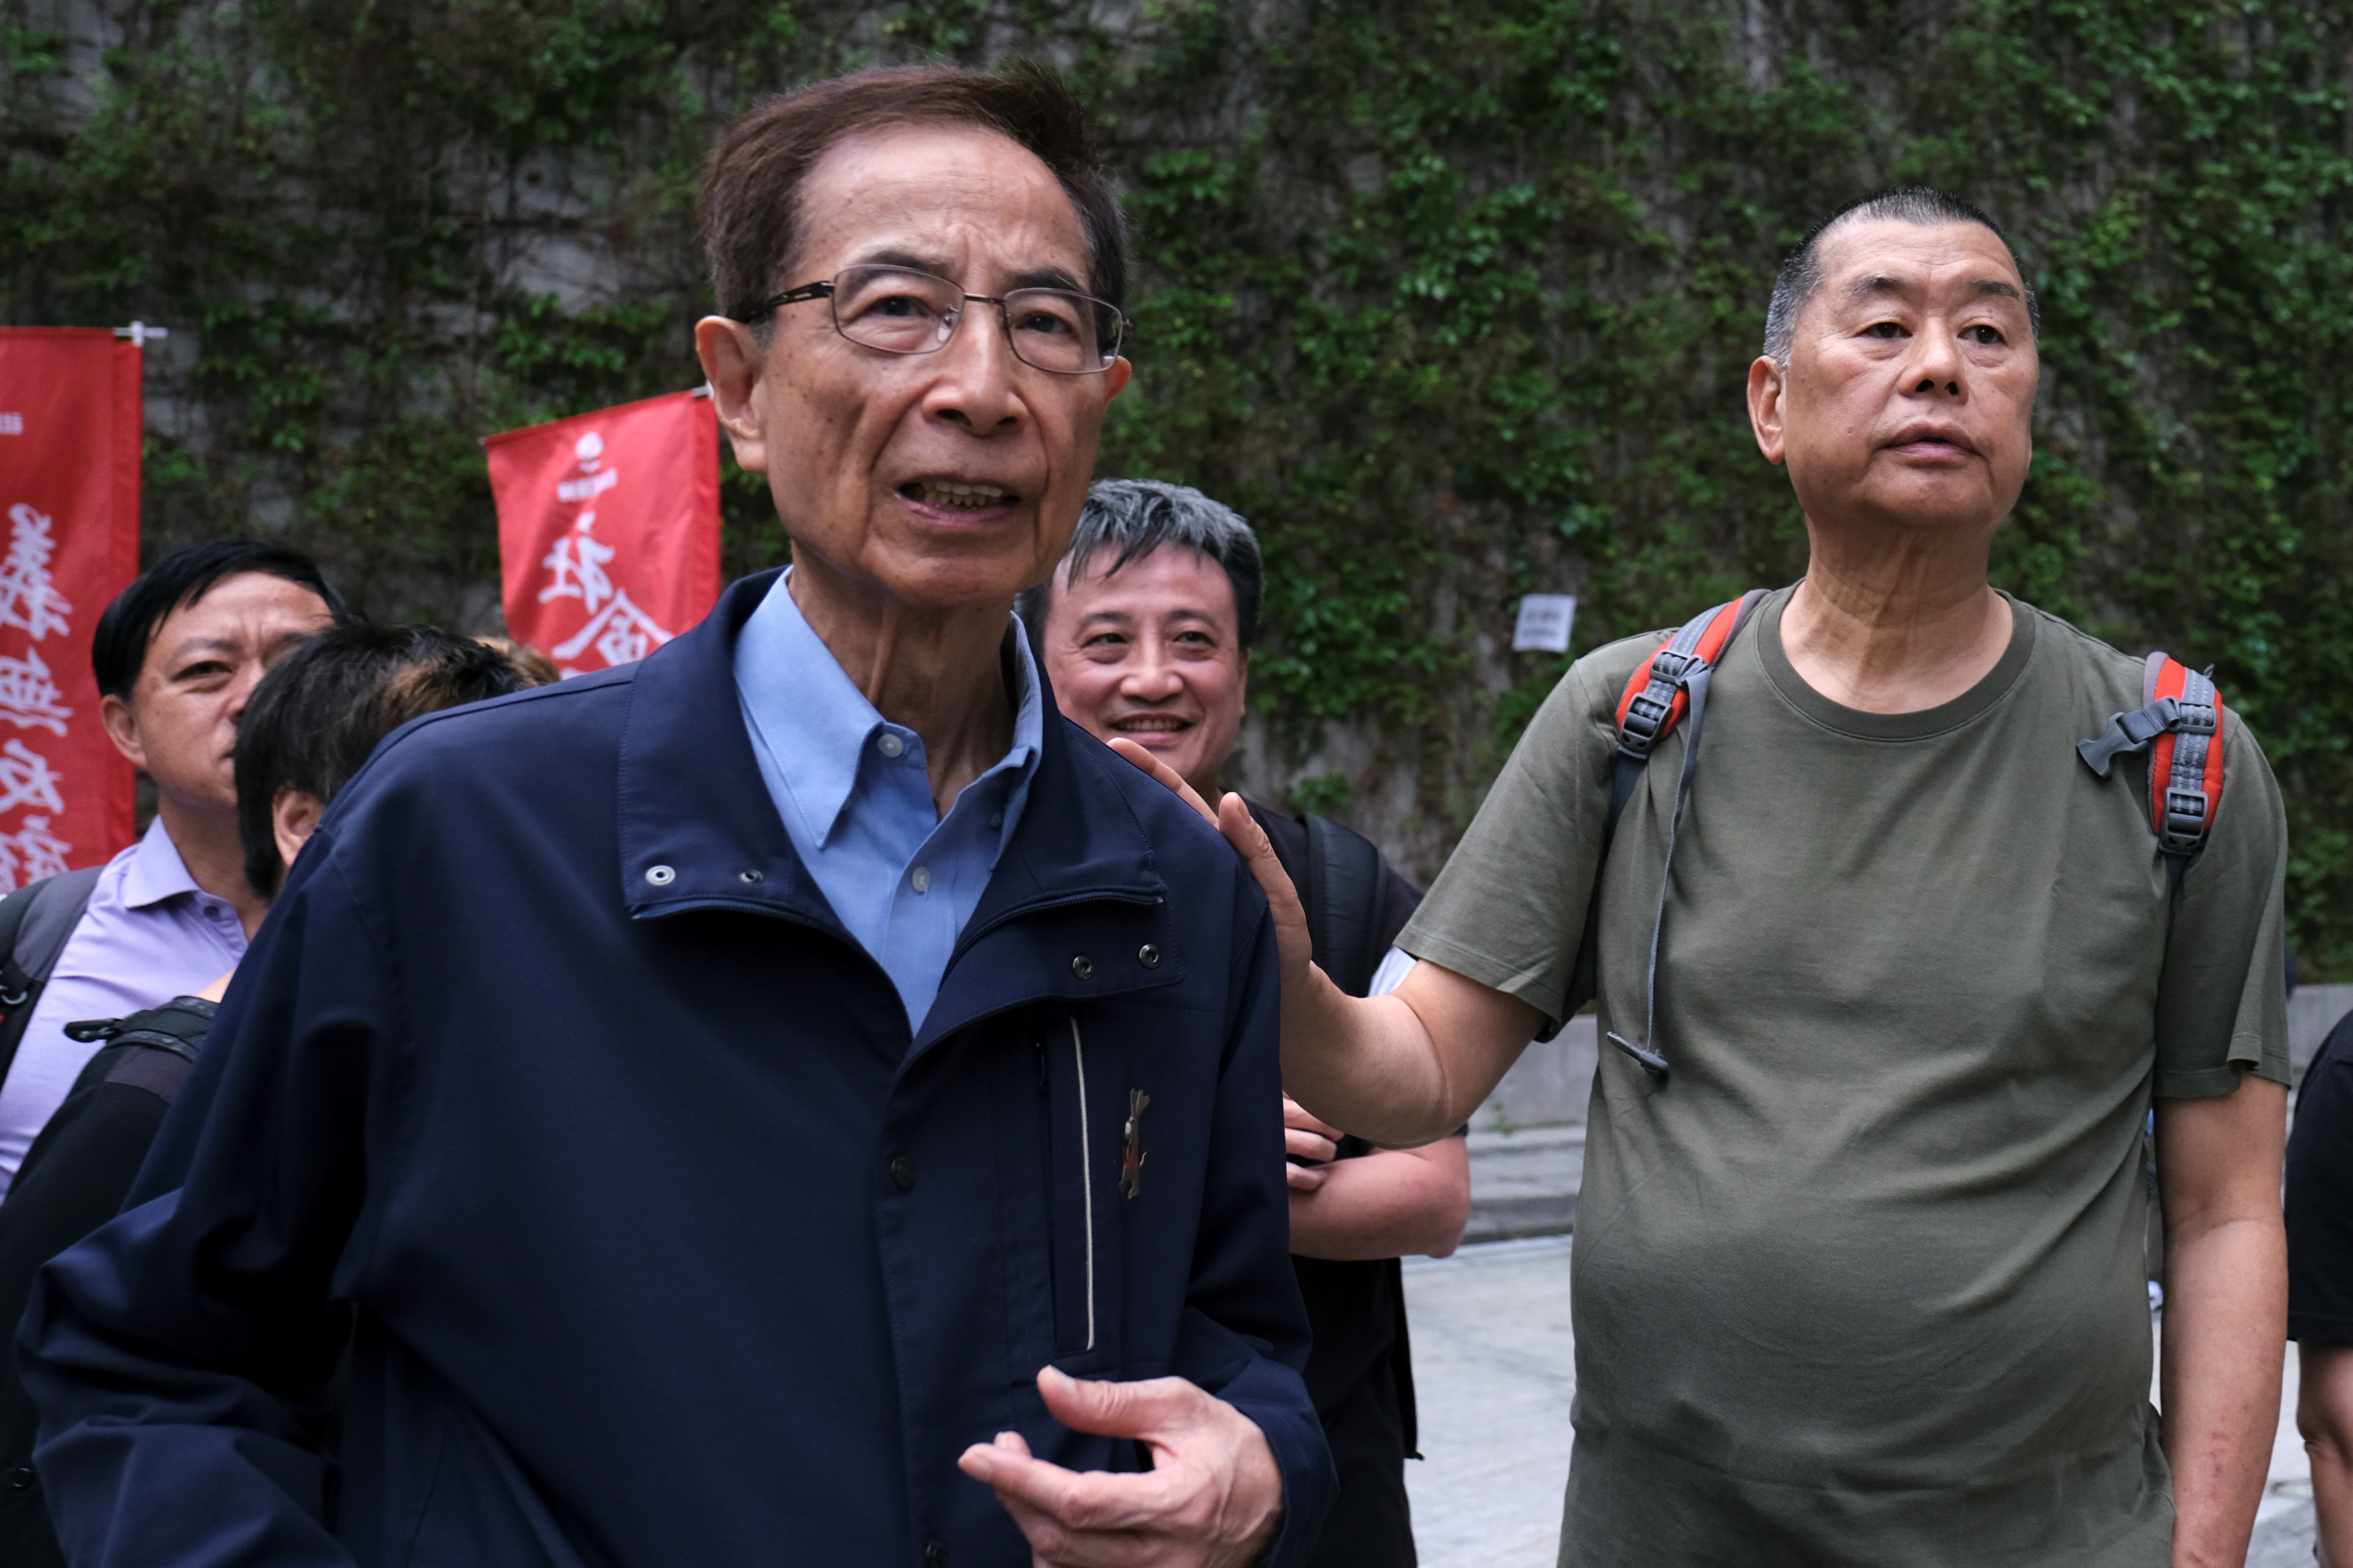 Hong Kong politician Martin Lee and Founder of Next Media Jimmy Lai march during a protest to demand authorities scrap a proposed extradition bill with China, in Hong Kong